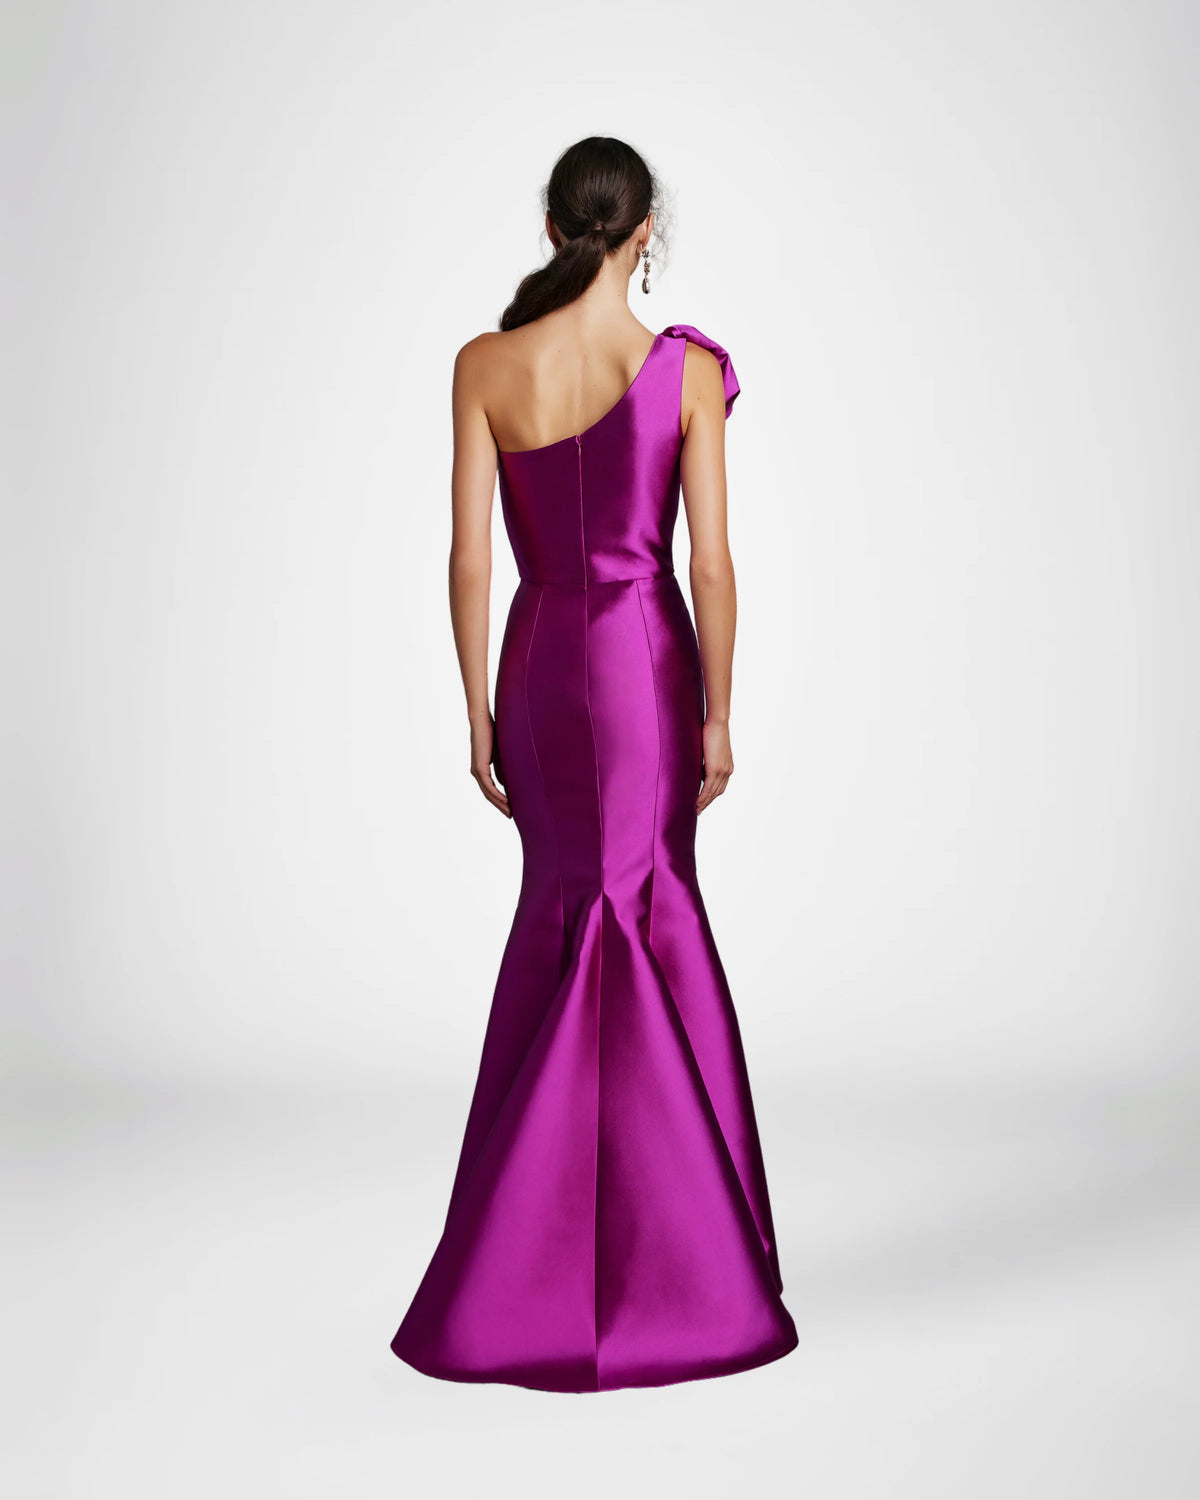 Frascara 4612 - A chic one-shoulder evening gown with an asymmetrical bow detail, perfect for formal evenings and mother of the bride or groom occasions. The model is wearing the dress in fuchsia. Back view.